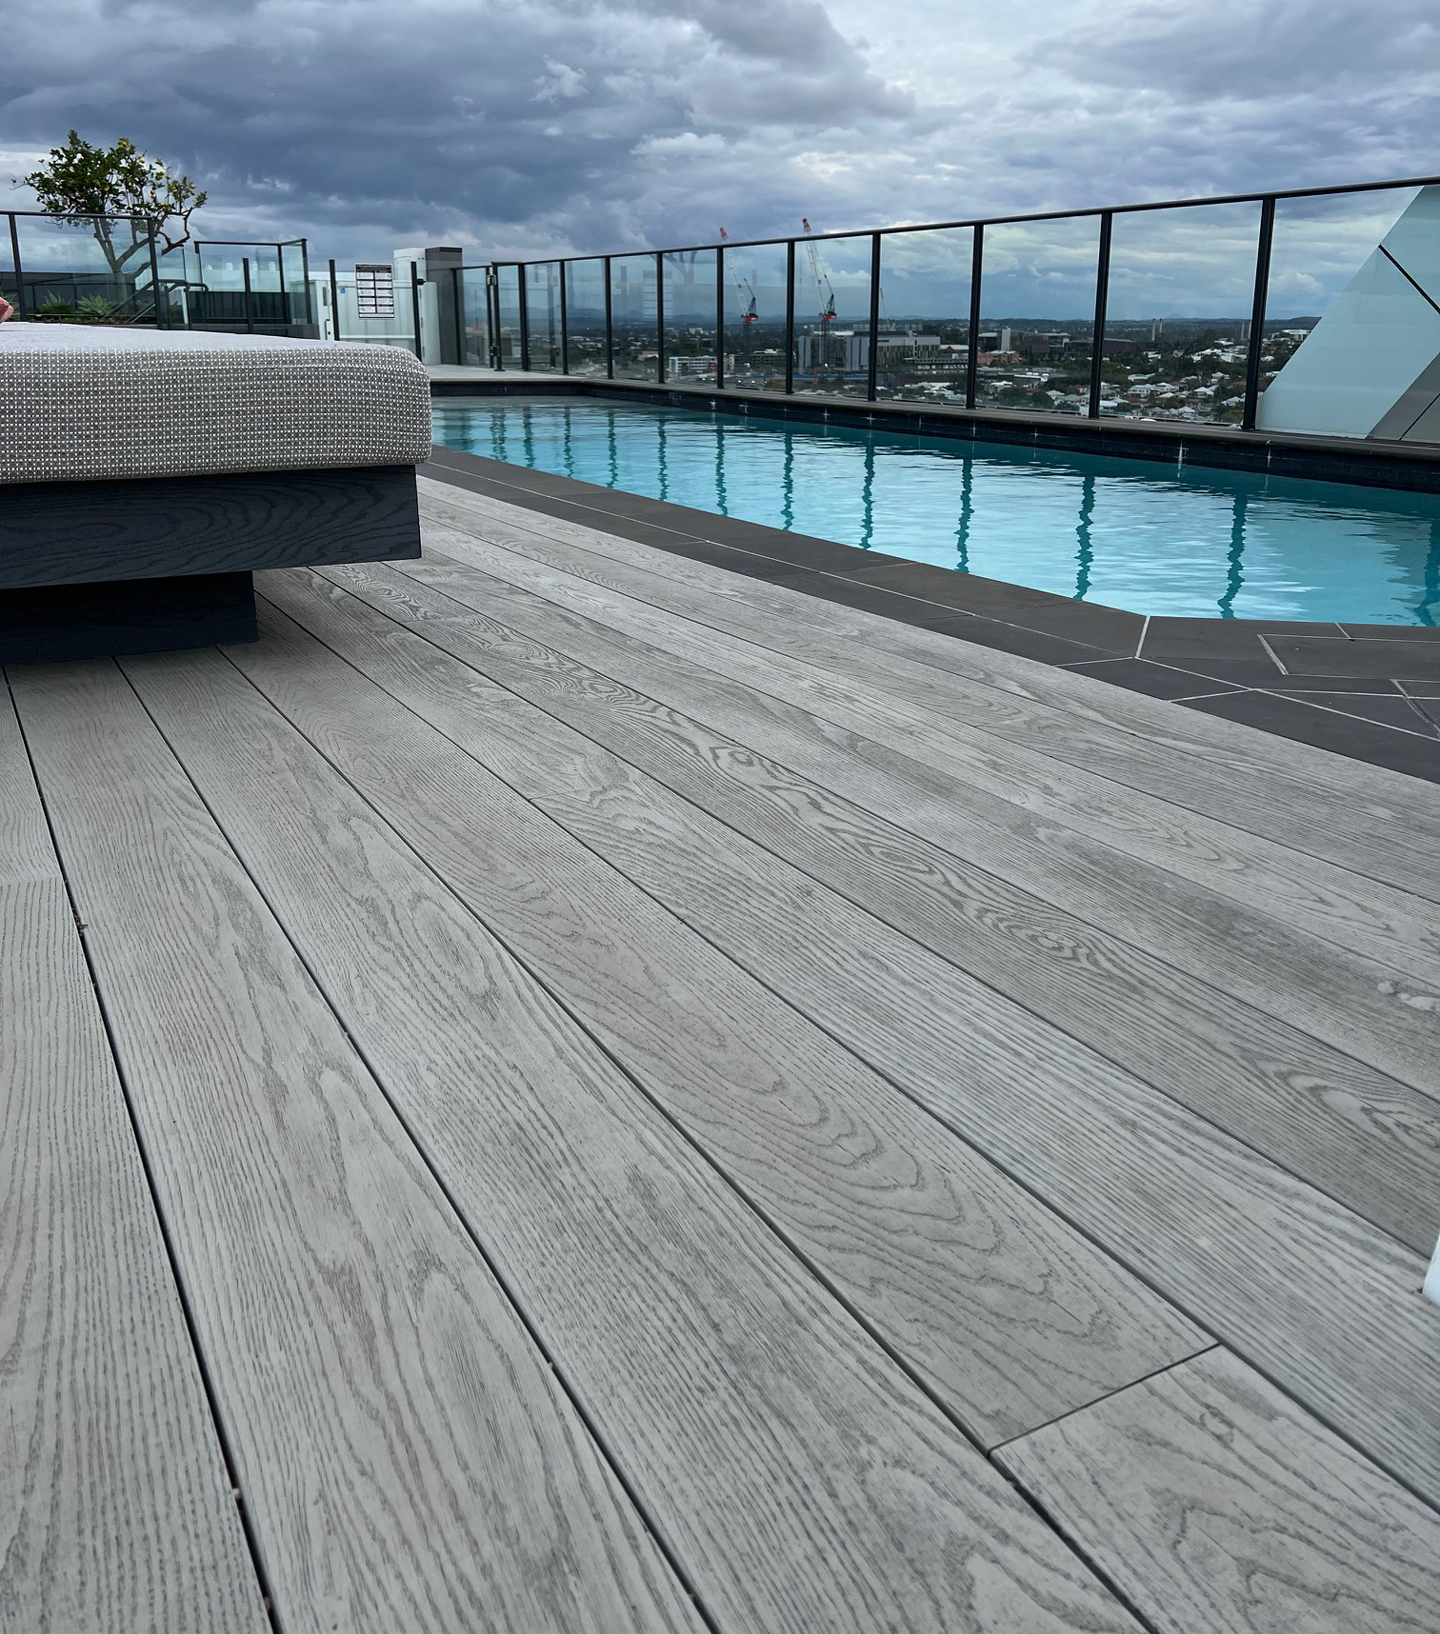 Rooftop lap pool with fake decking